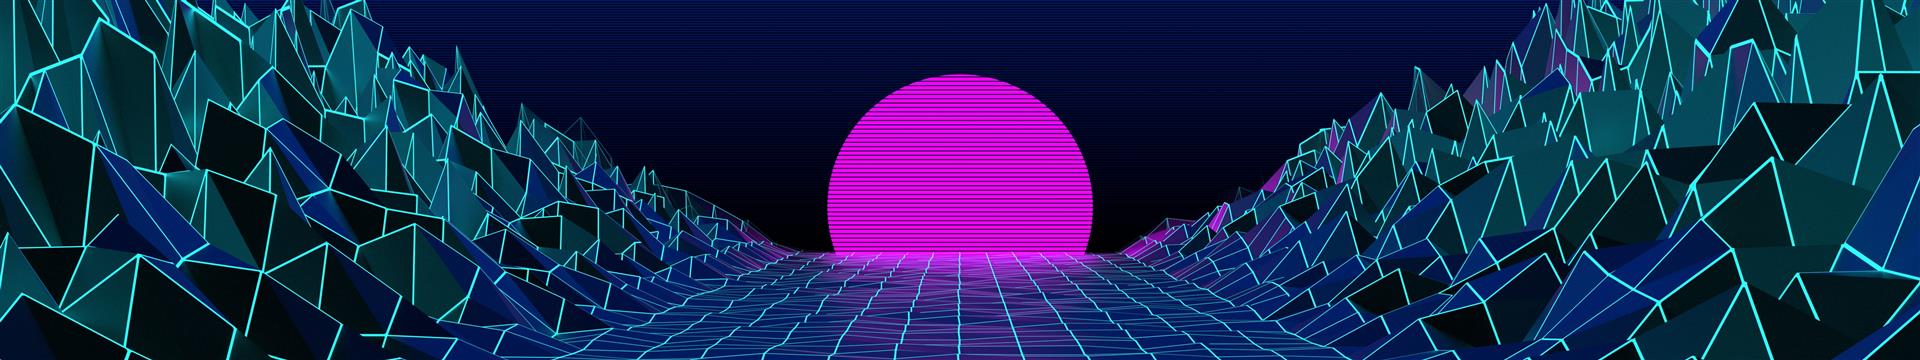 synthwave, retrowave, scanlines, grid, mountains, architecture, HD wallpaper